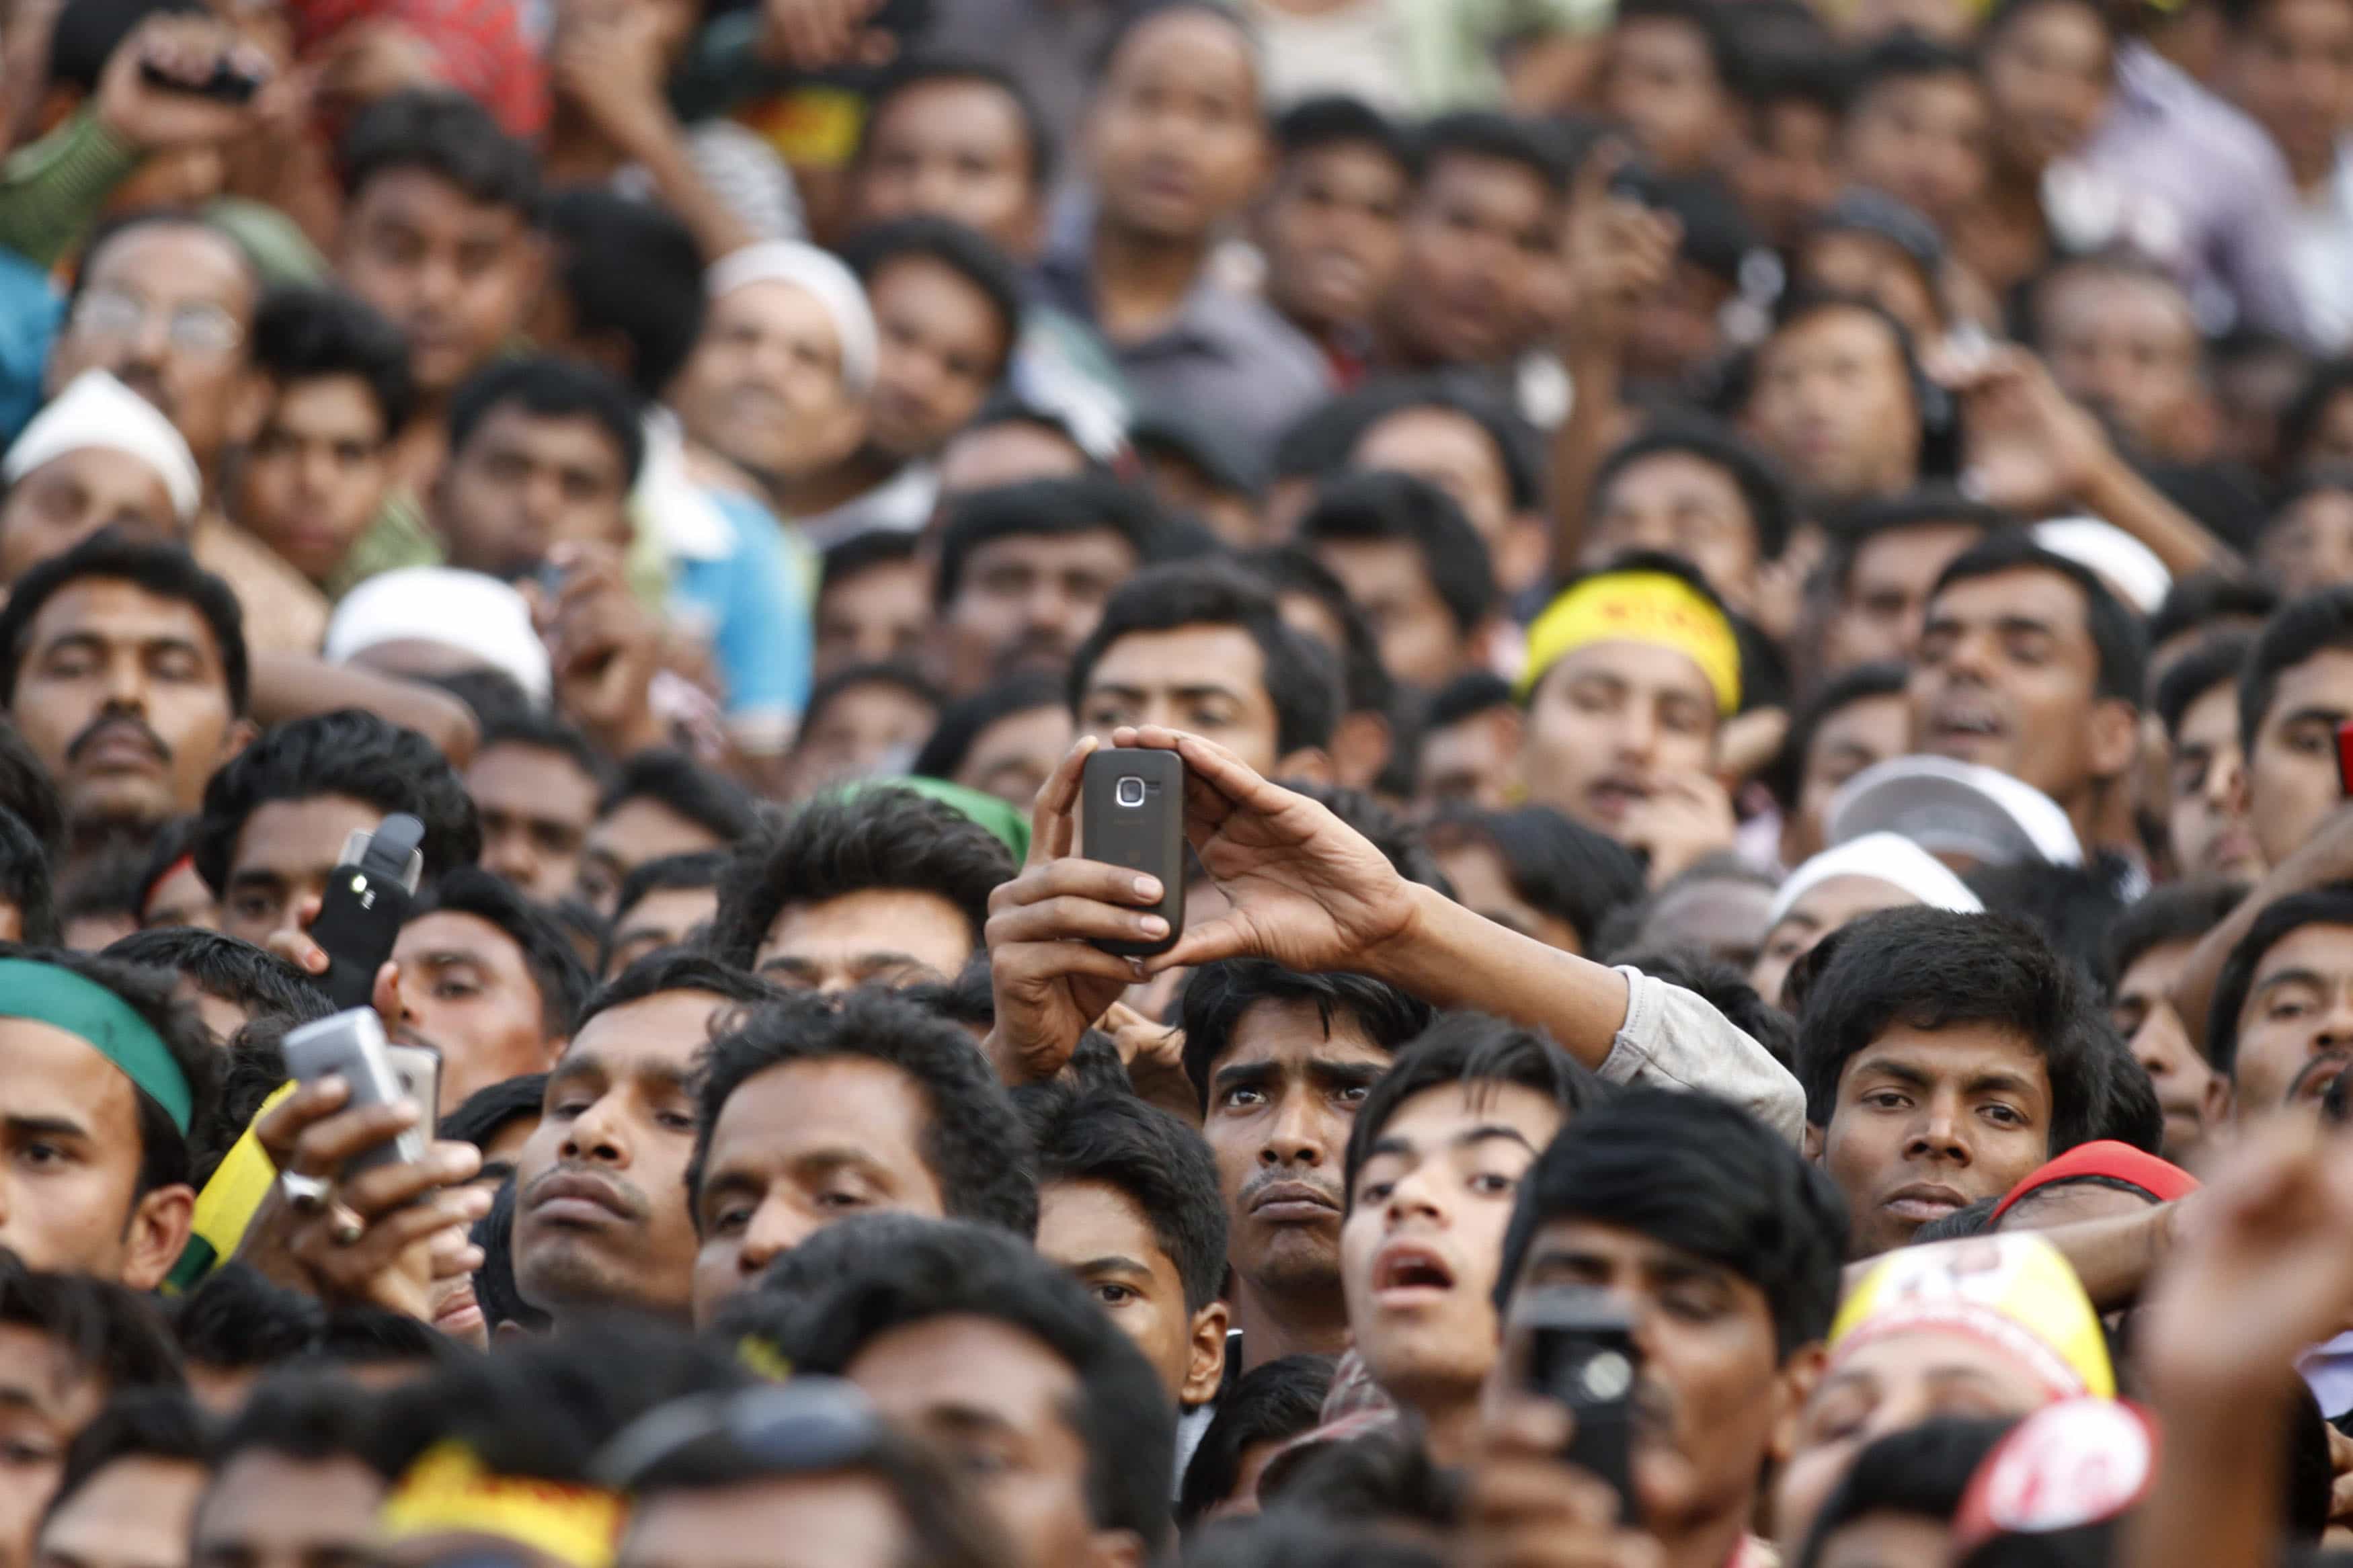 A supporter of Bangladesh Awami League takes pictures with a mobile phone during a rally in Dhaka, 14 March 2012, REUTERS/Andrew Biraj